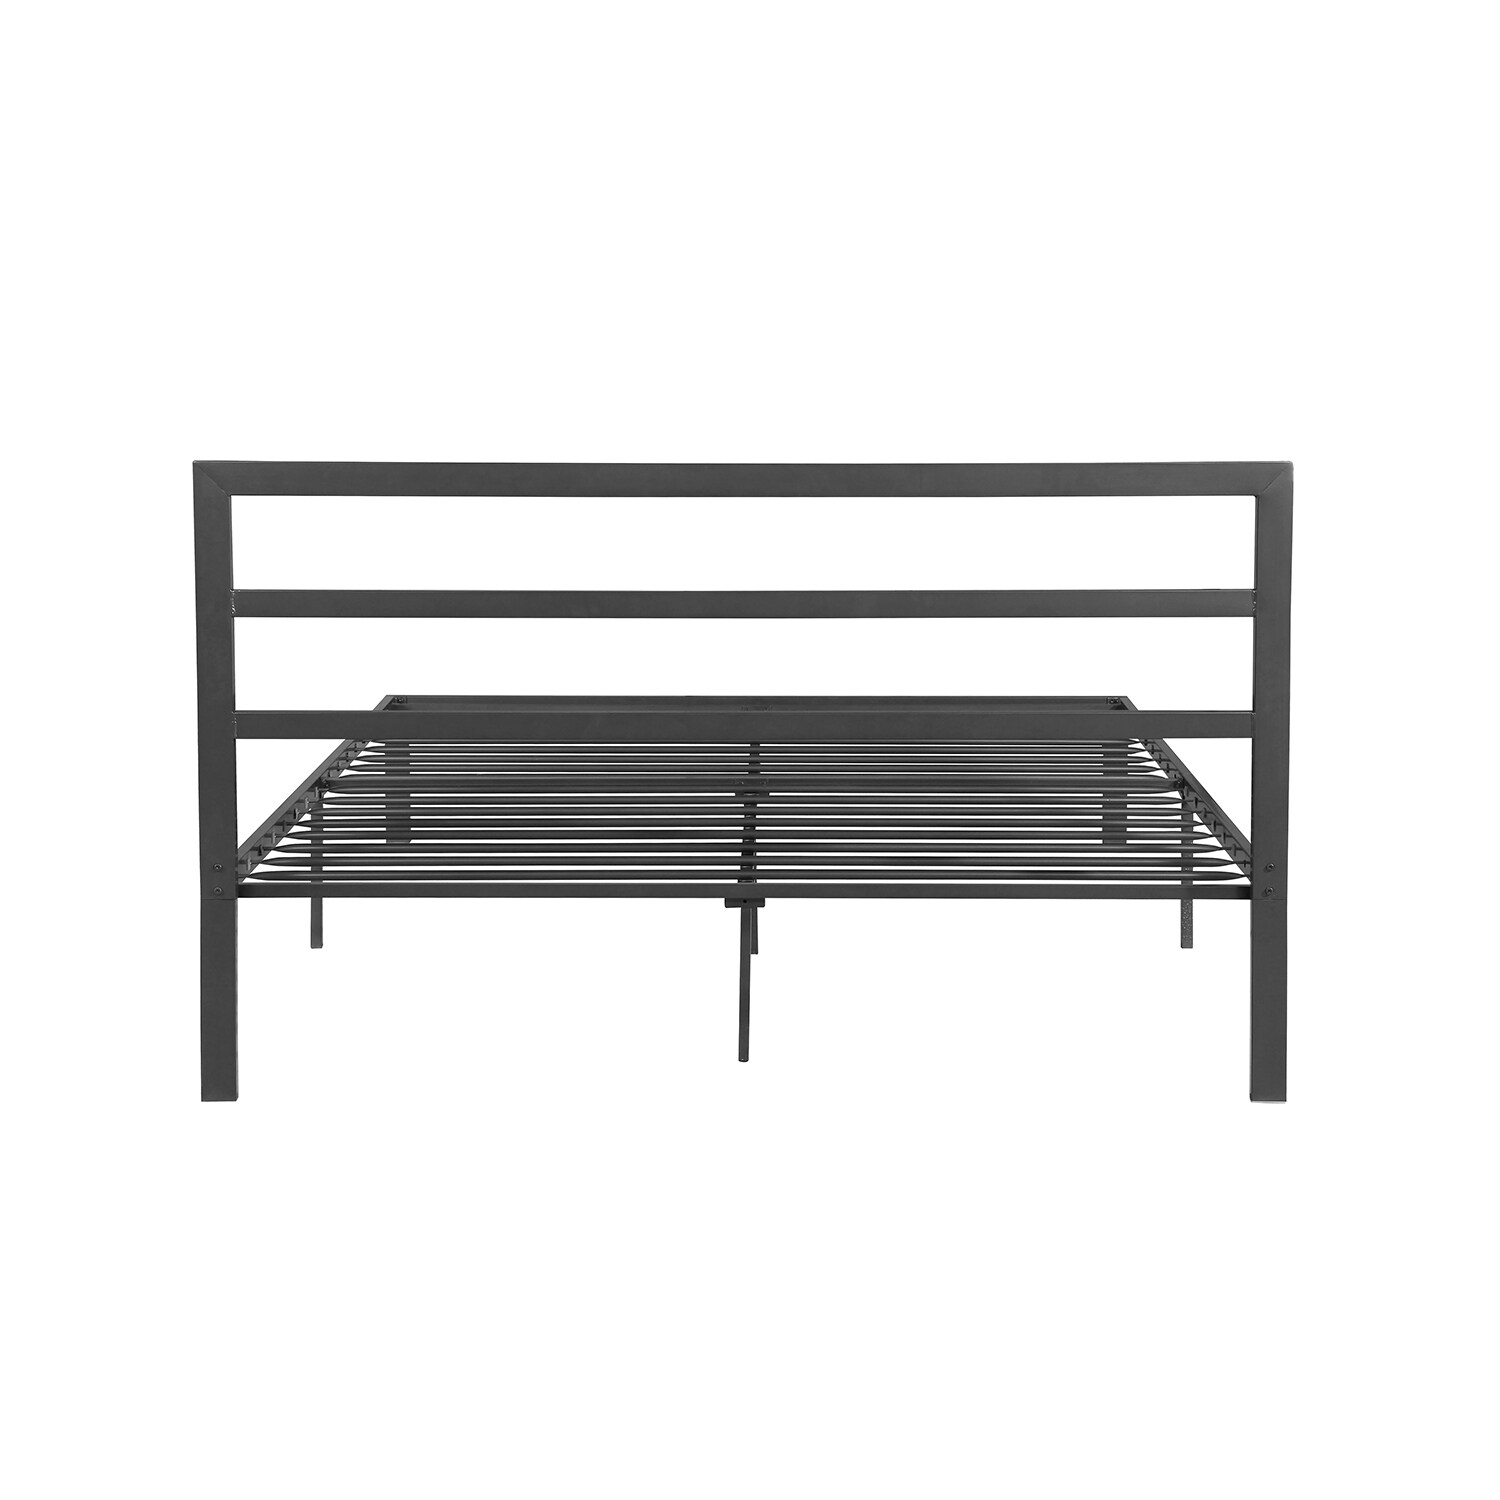 Gzmr Queen Size Metal Bed Frame Charcoal Gray Queen Metal Bed Frame In 